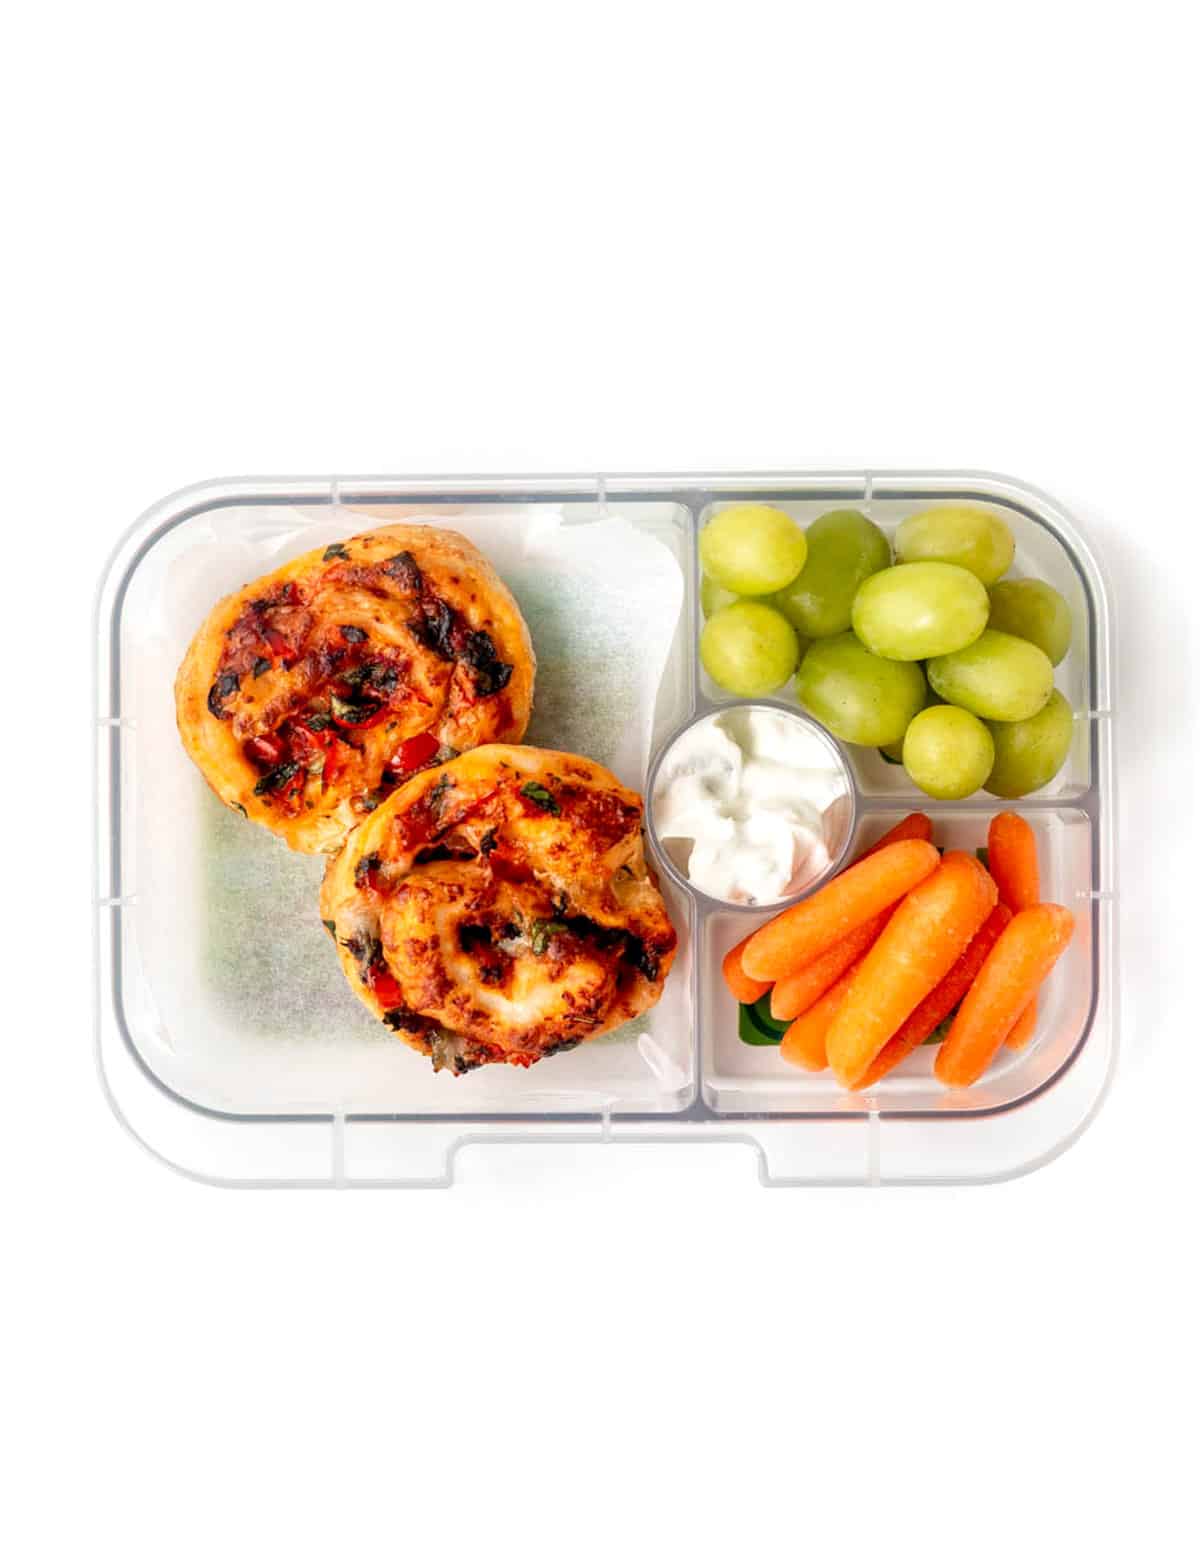 A lunch box with two veggie pizza rolls, grapes, carrots and tzatziki.